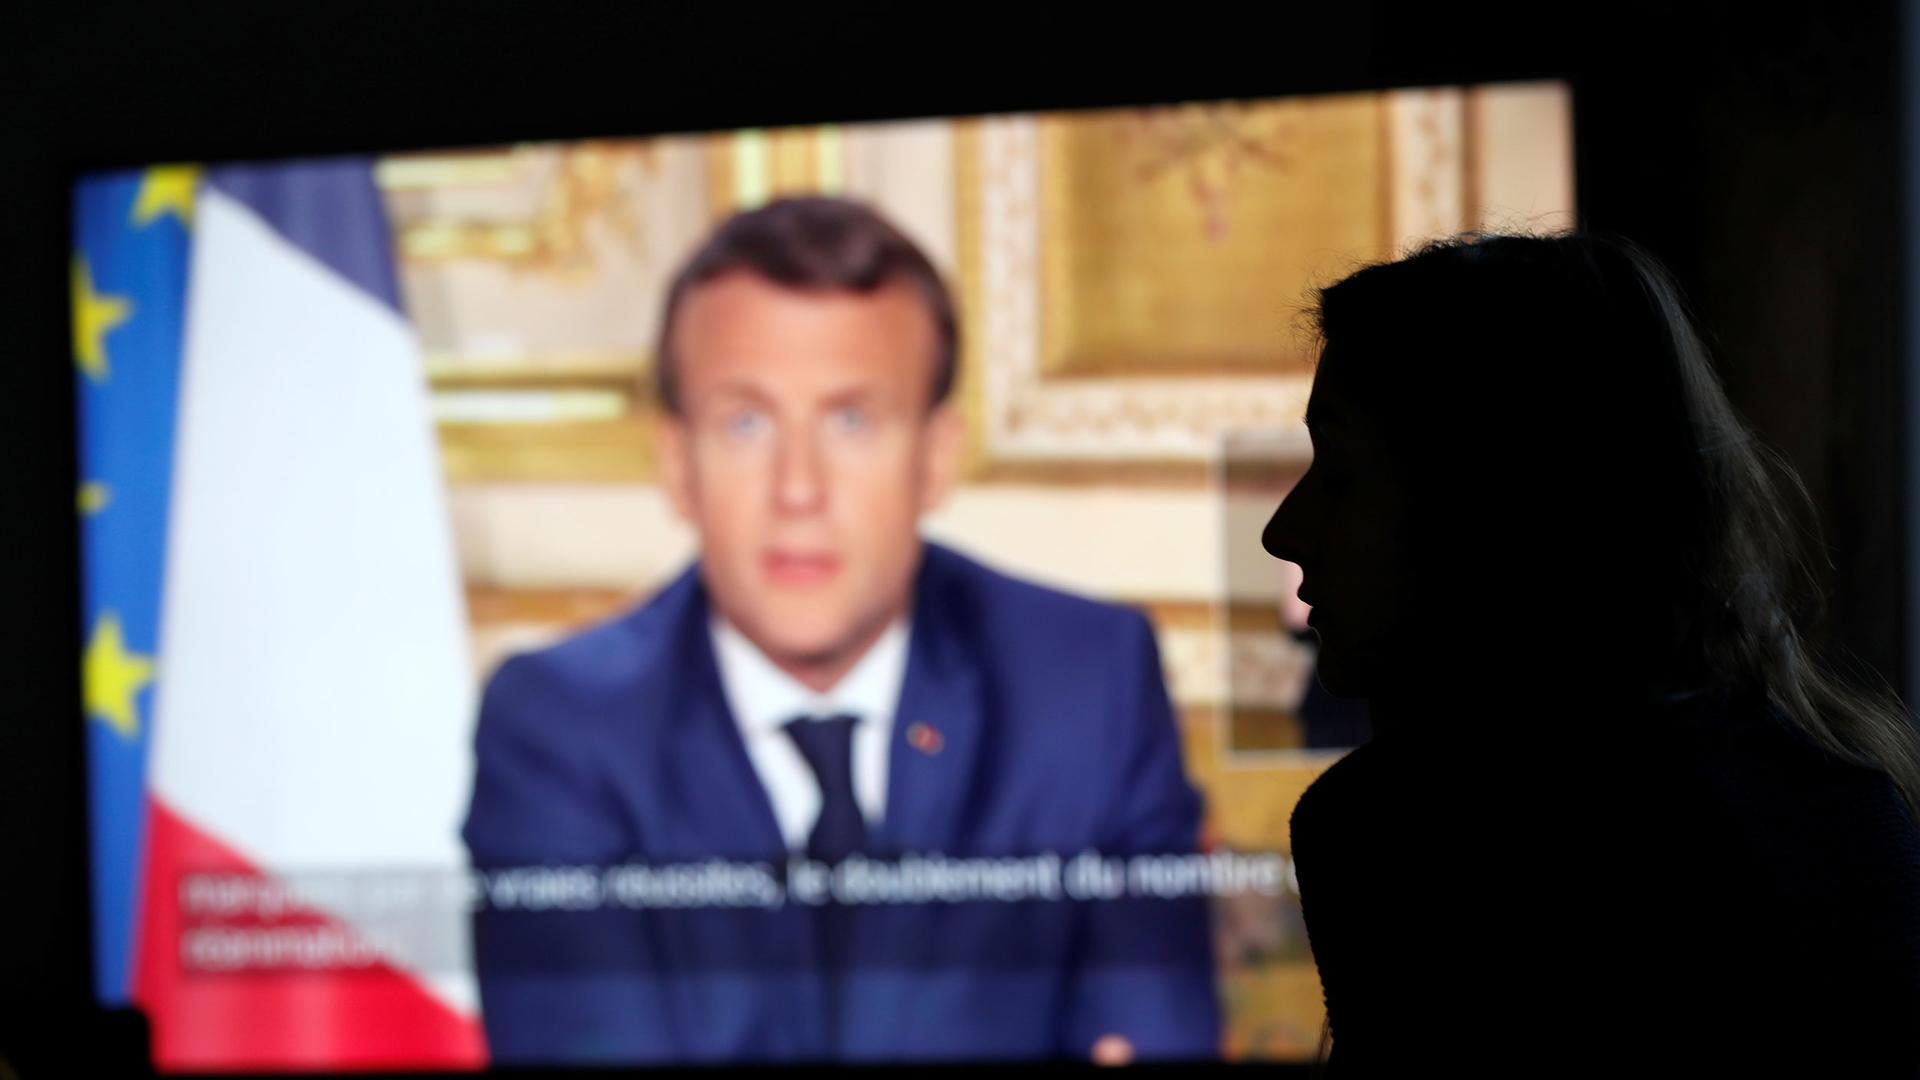 French President Emmanuel Macron is seen on a TV screen in soft focus with a person in shadow in the nearground.